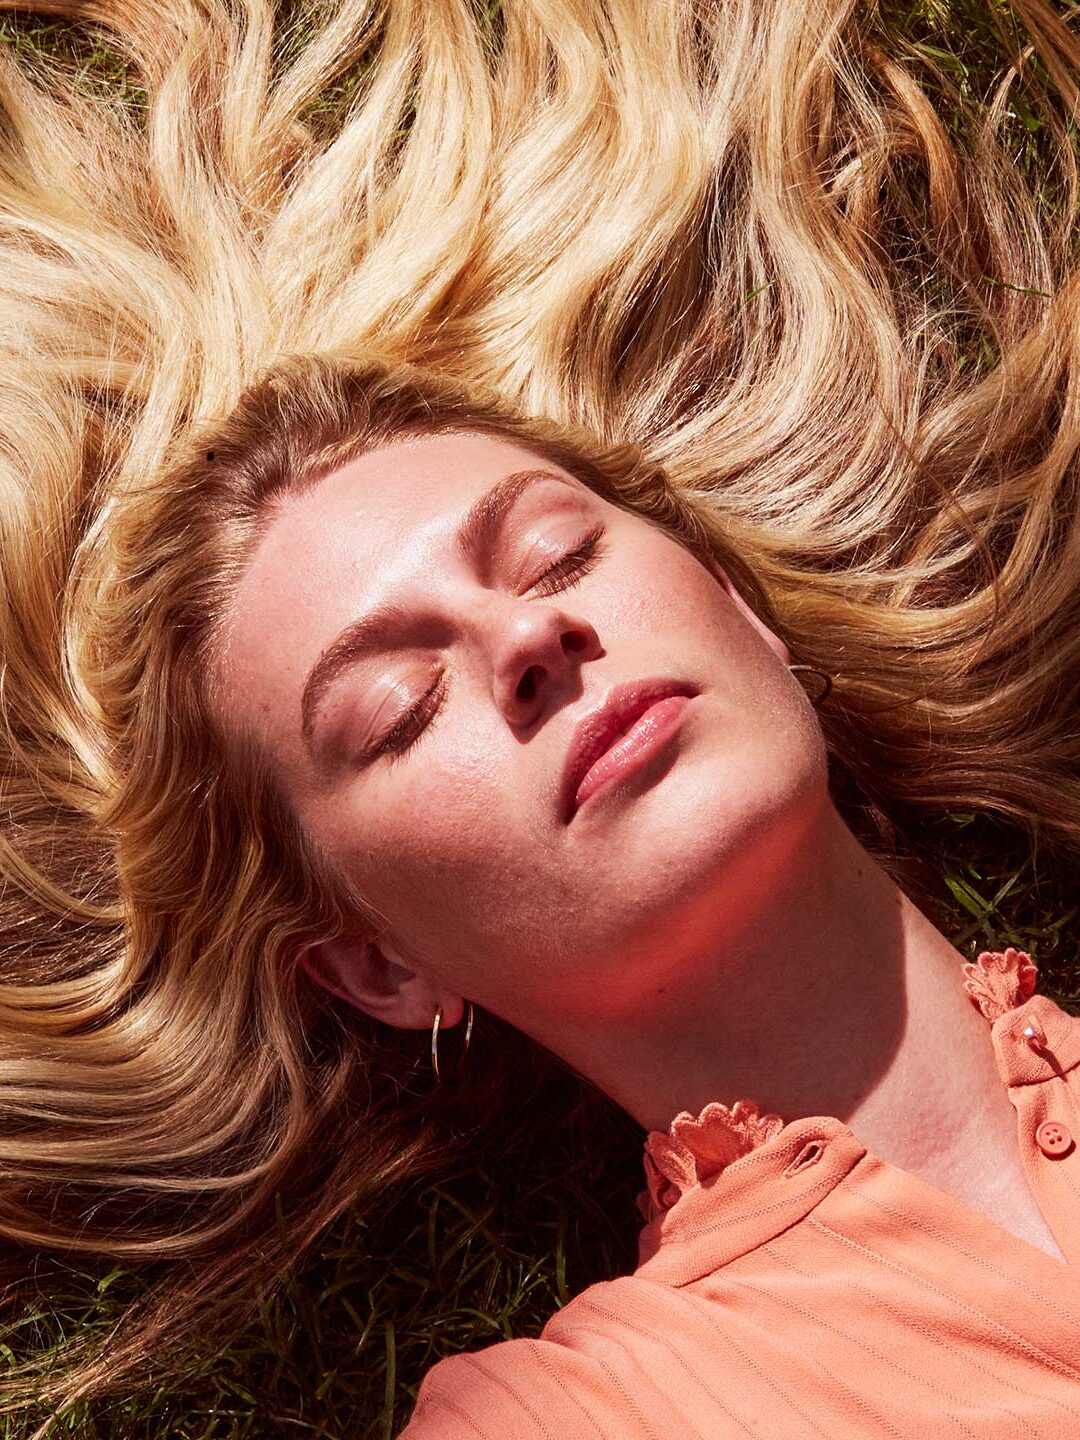 A model lies on the ground with her eyes closed and her long blond hair fanned around her head.